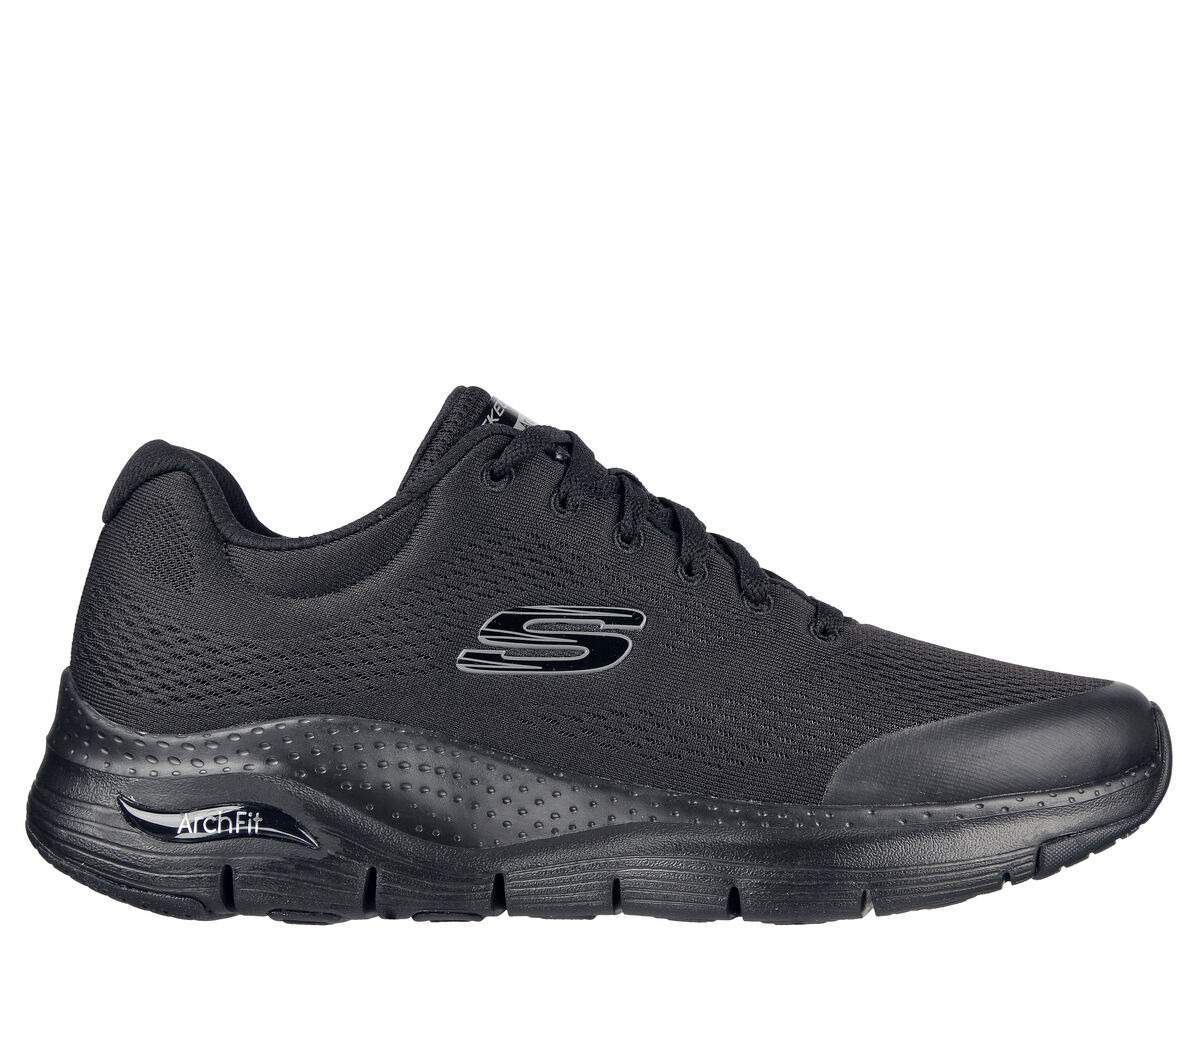 Where Can I Buy Skechers Arch Fit?